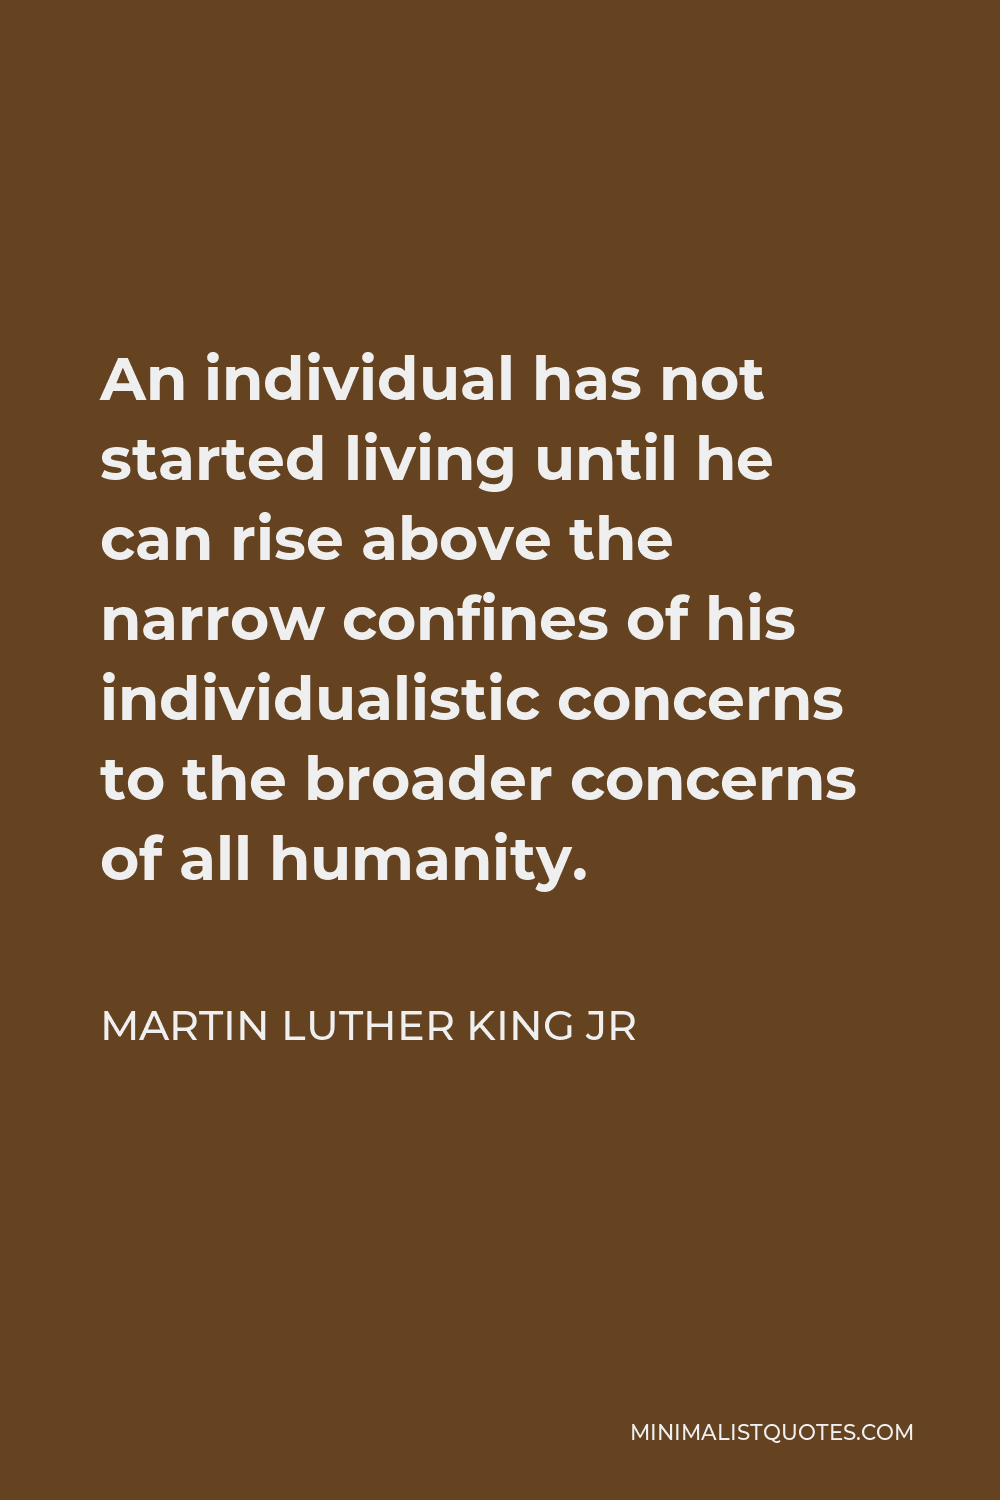 Martin Luther King Jr Quote - An individual has not started living until he can rise above the narrow confines of his individualistic concerns to the broader concerns of all humanity.